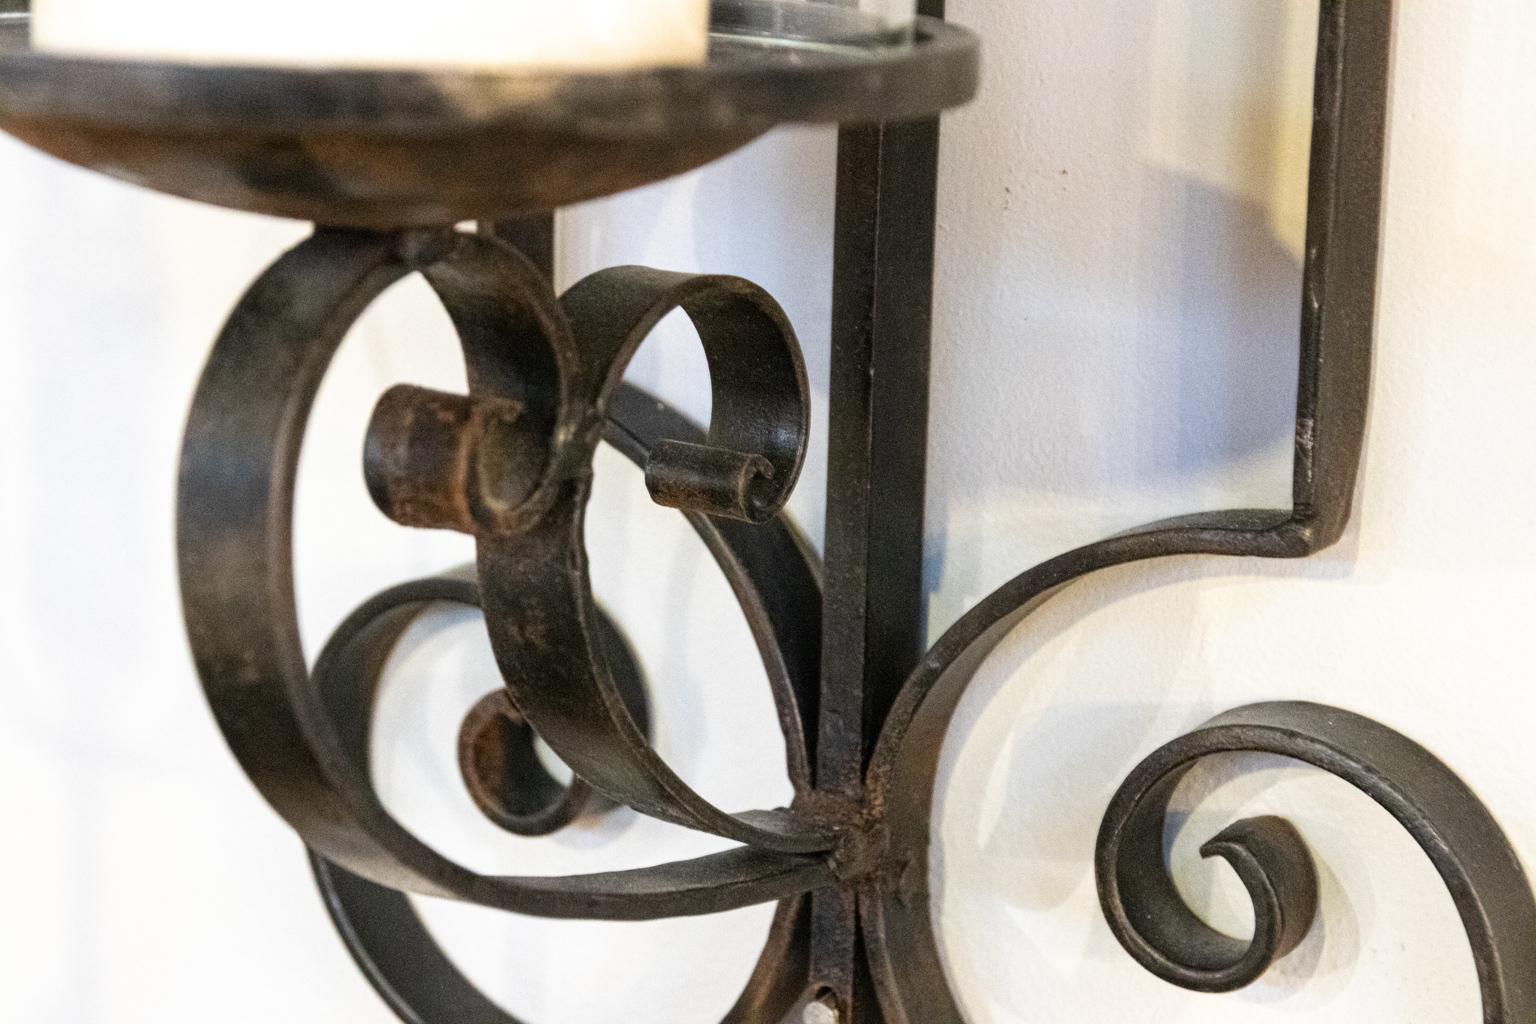 Pair of wrought iron wall sconces with newly purchased glass hurricane cylinders and candles. Both are removable. There are two holes in rod that allow for attachment to wall.